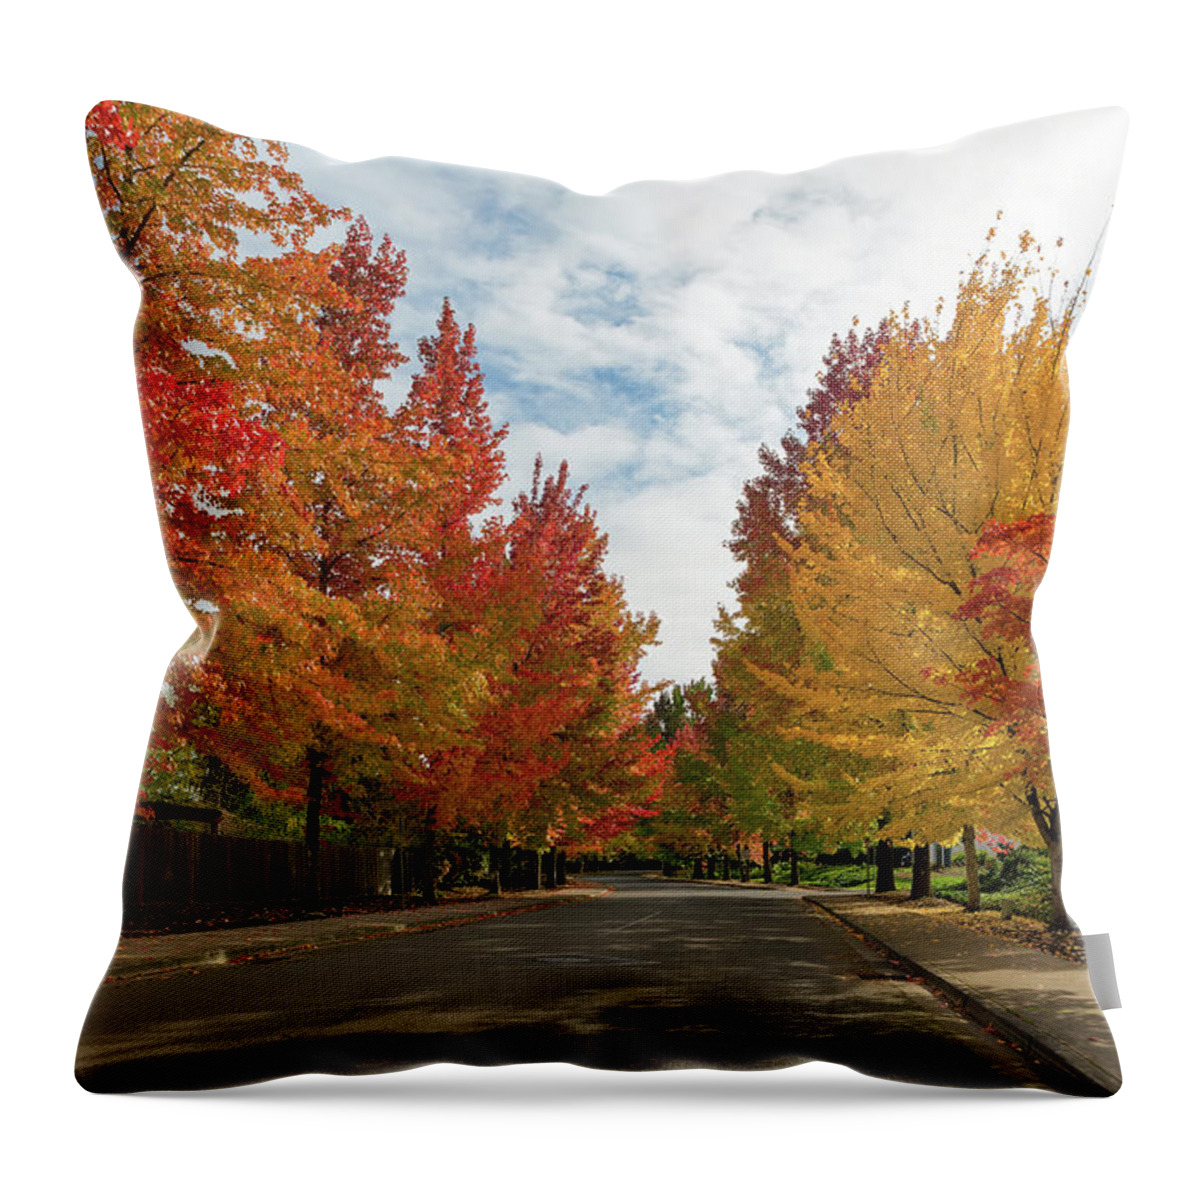 Maple Throw Pillow featuring the photograph Sweetgum Trees Foliage Lined Street during Fall Season by David Gn